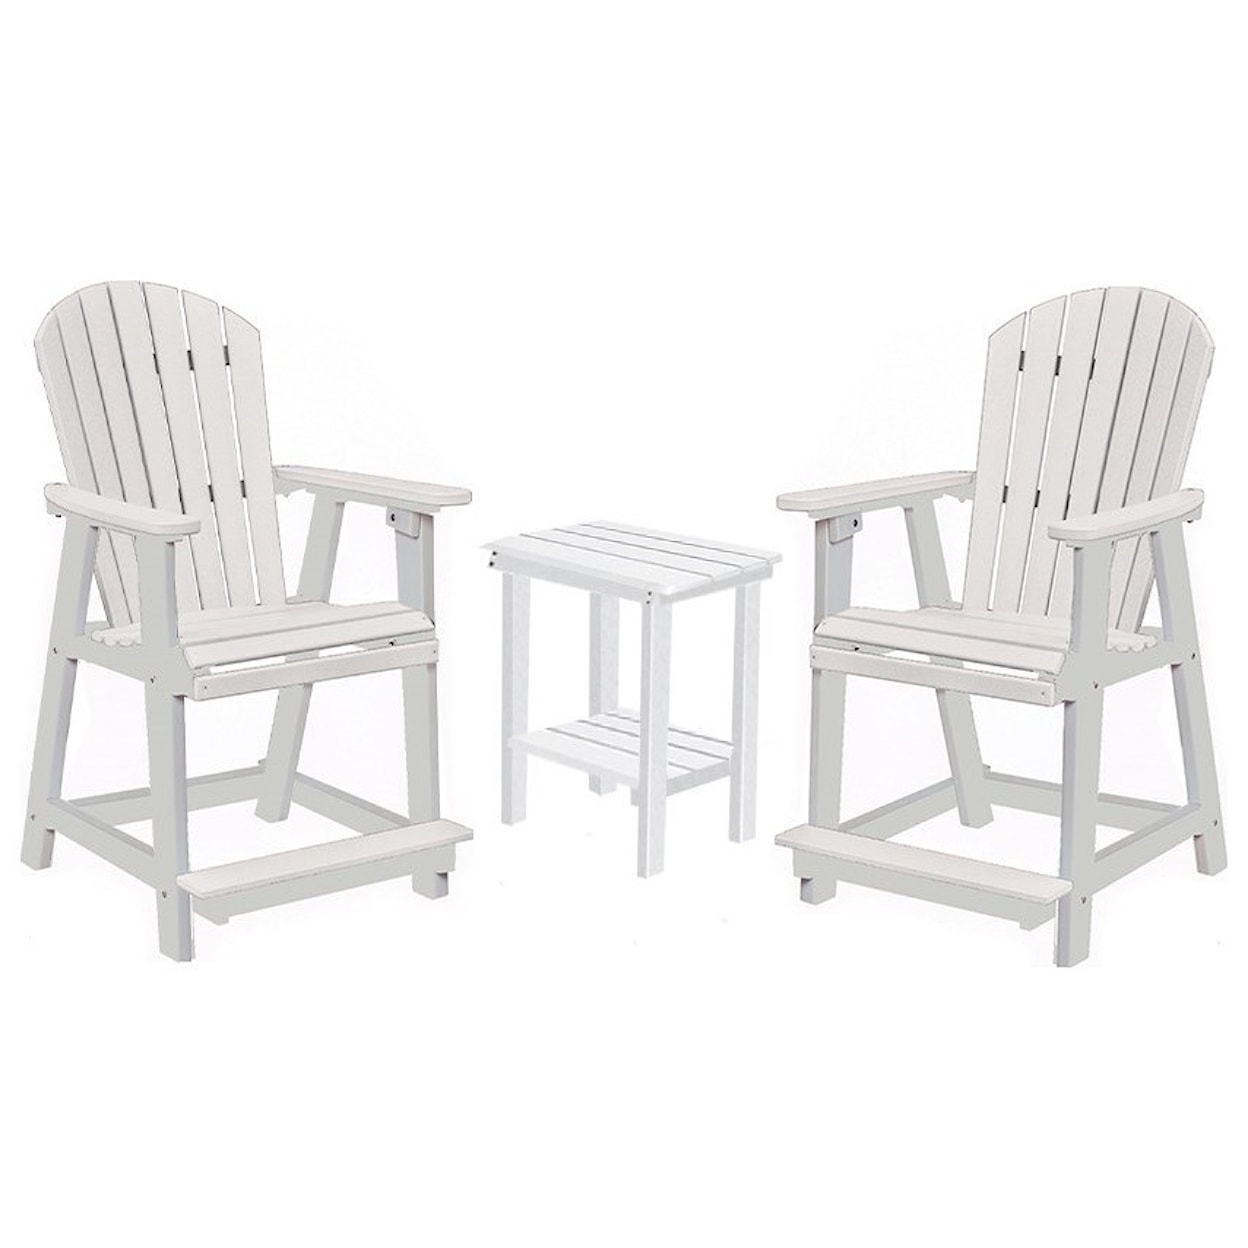 Berlin Gardens Accessories End Table and Chairs Set